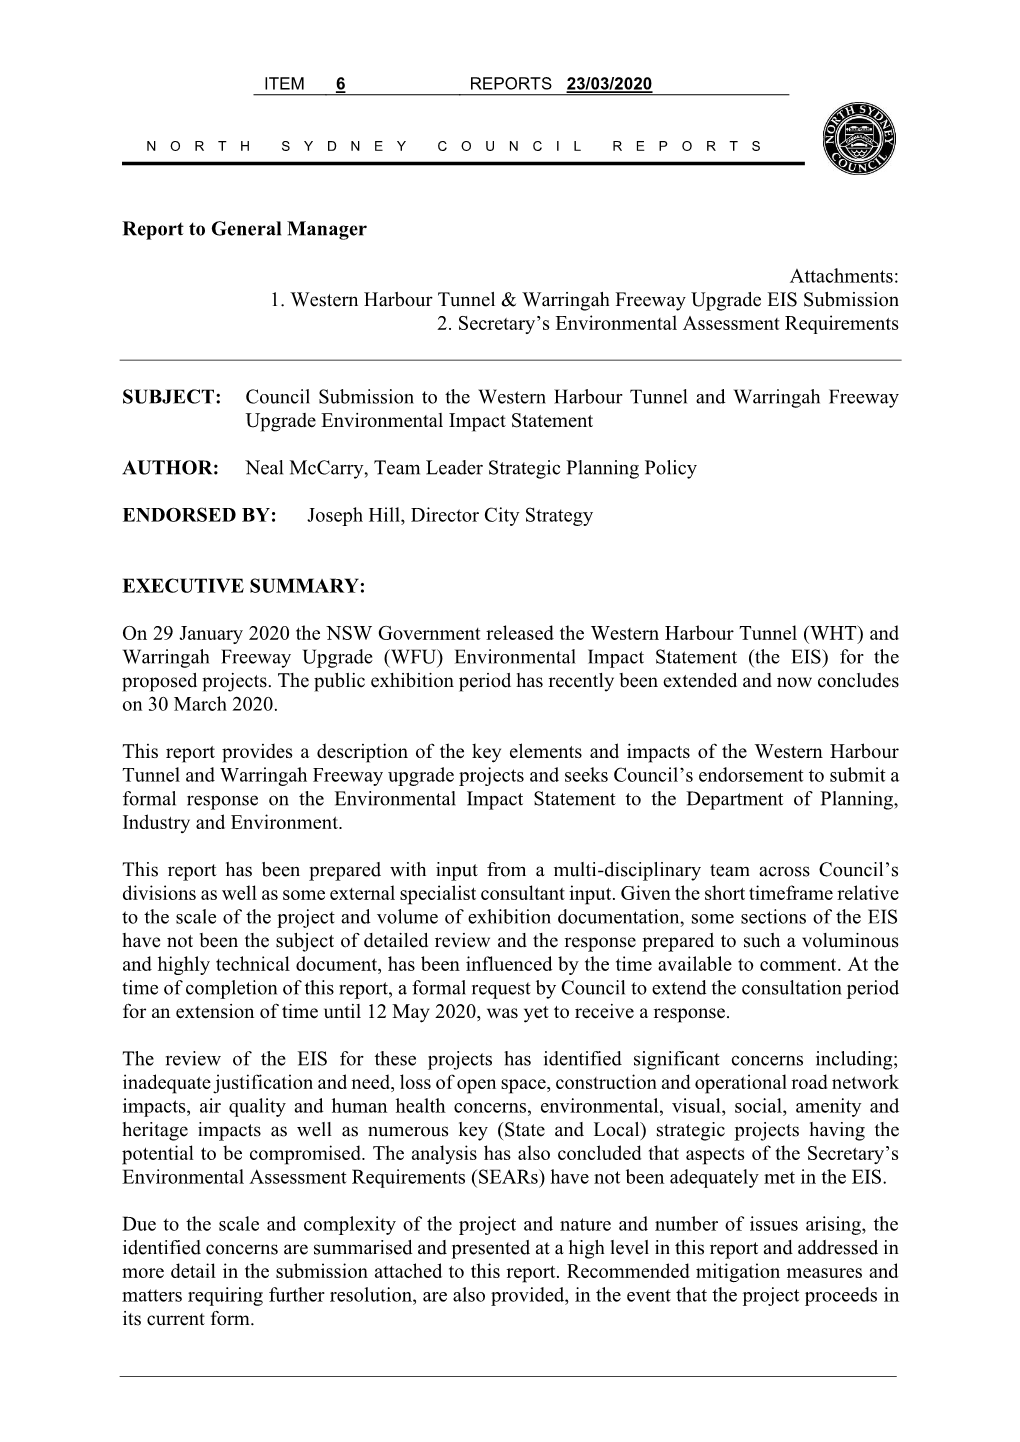 Council Submission to the Western Harbour Tunnel and Warringah Freeway Upgrade Environmental Impact Statement